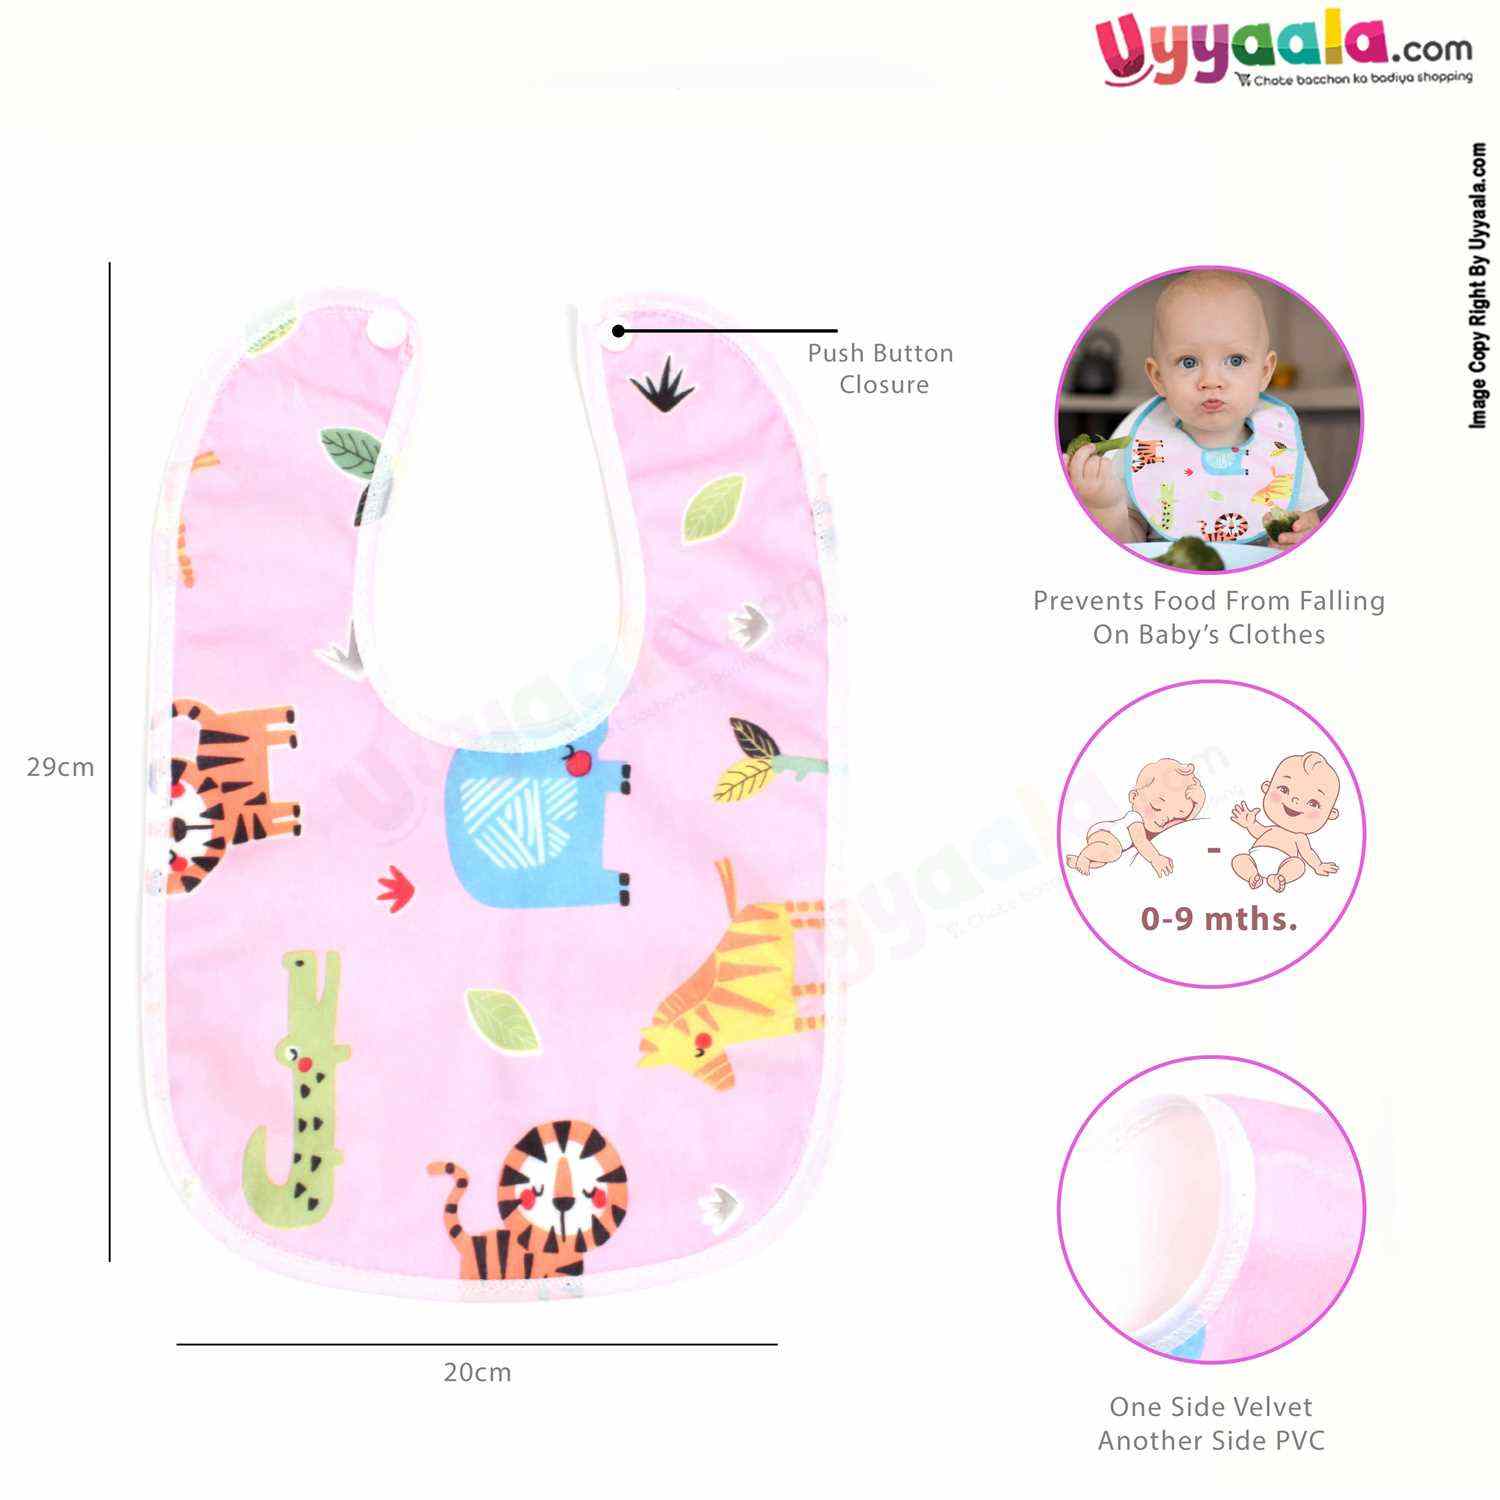 Baby Bib One Side Velvet & Another Side PVC with Animals Print for Newborn Pack of 3,Size(28.5*19.5cm)- Multi color